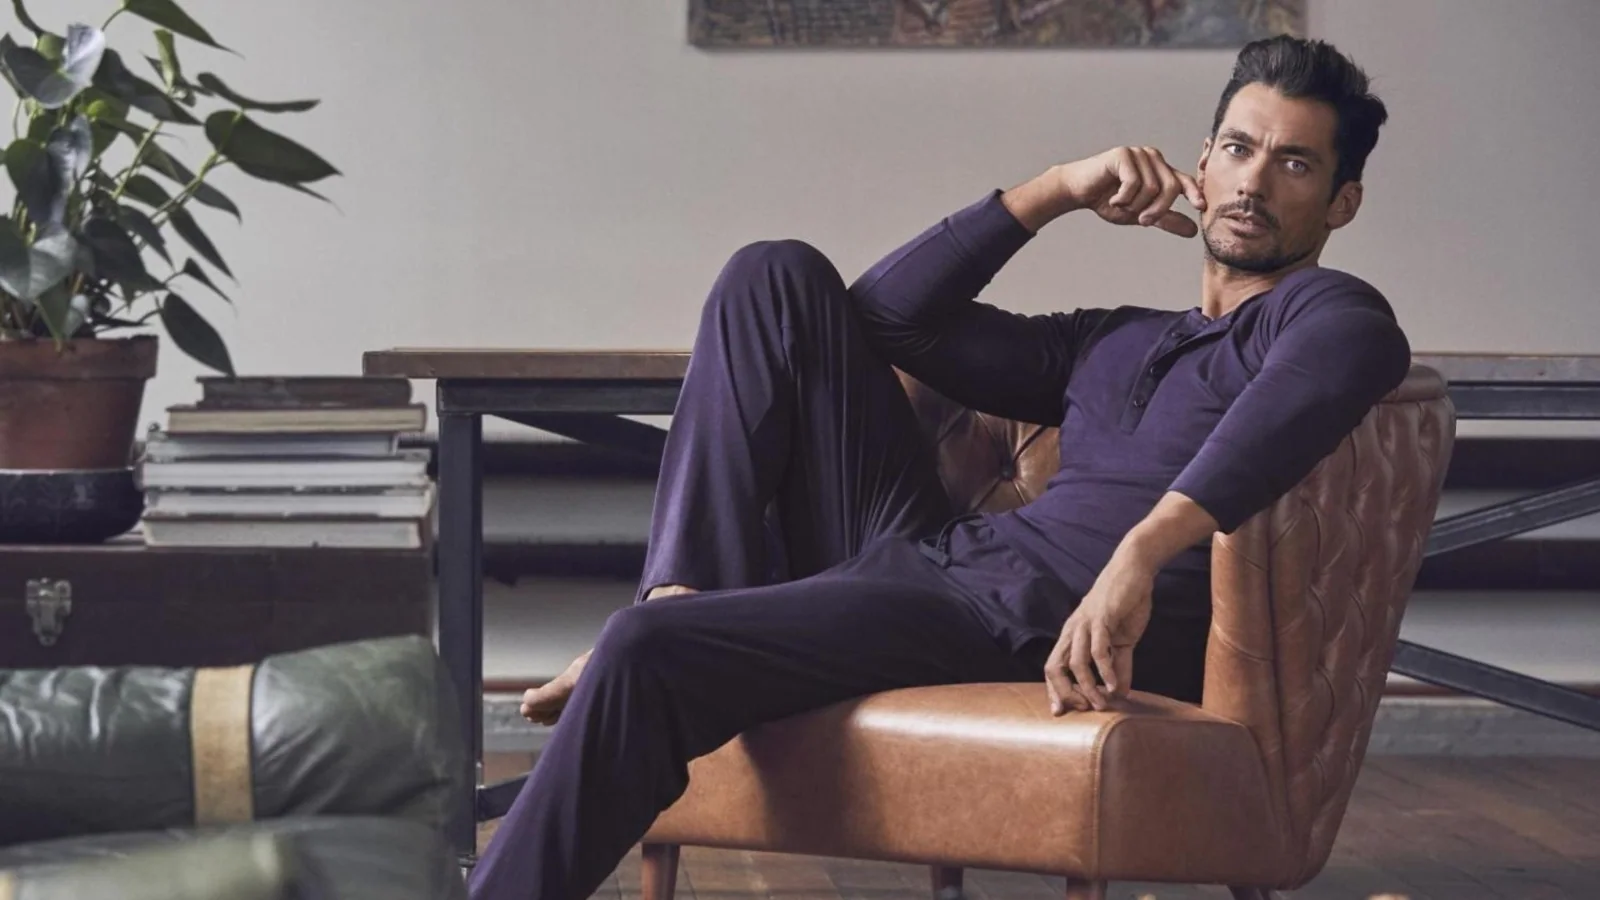 Loungewear fashion tips for men: Here’s how to give sleepwear pyjamas a casual sexy spin when stepping out